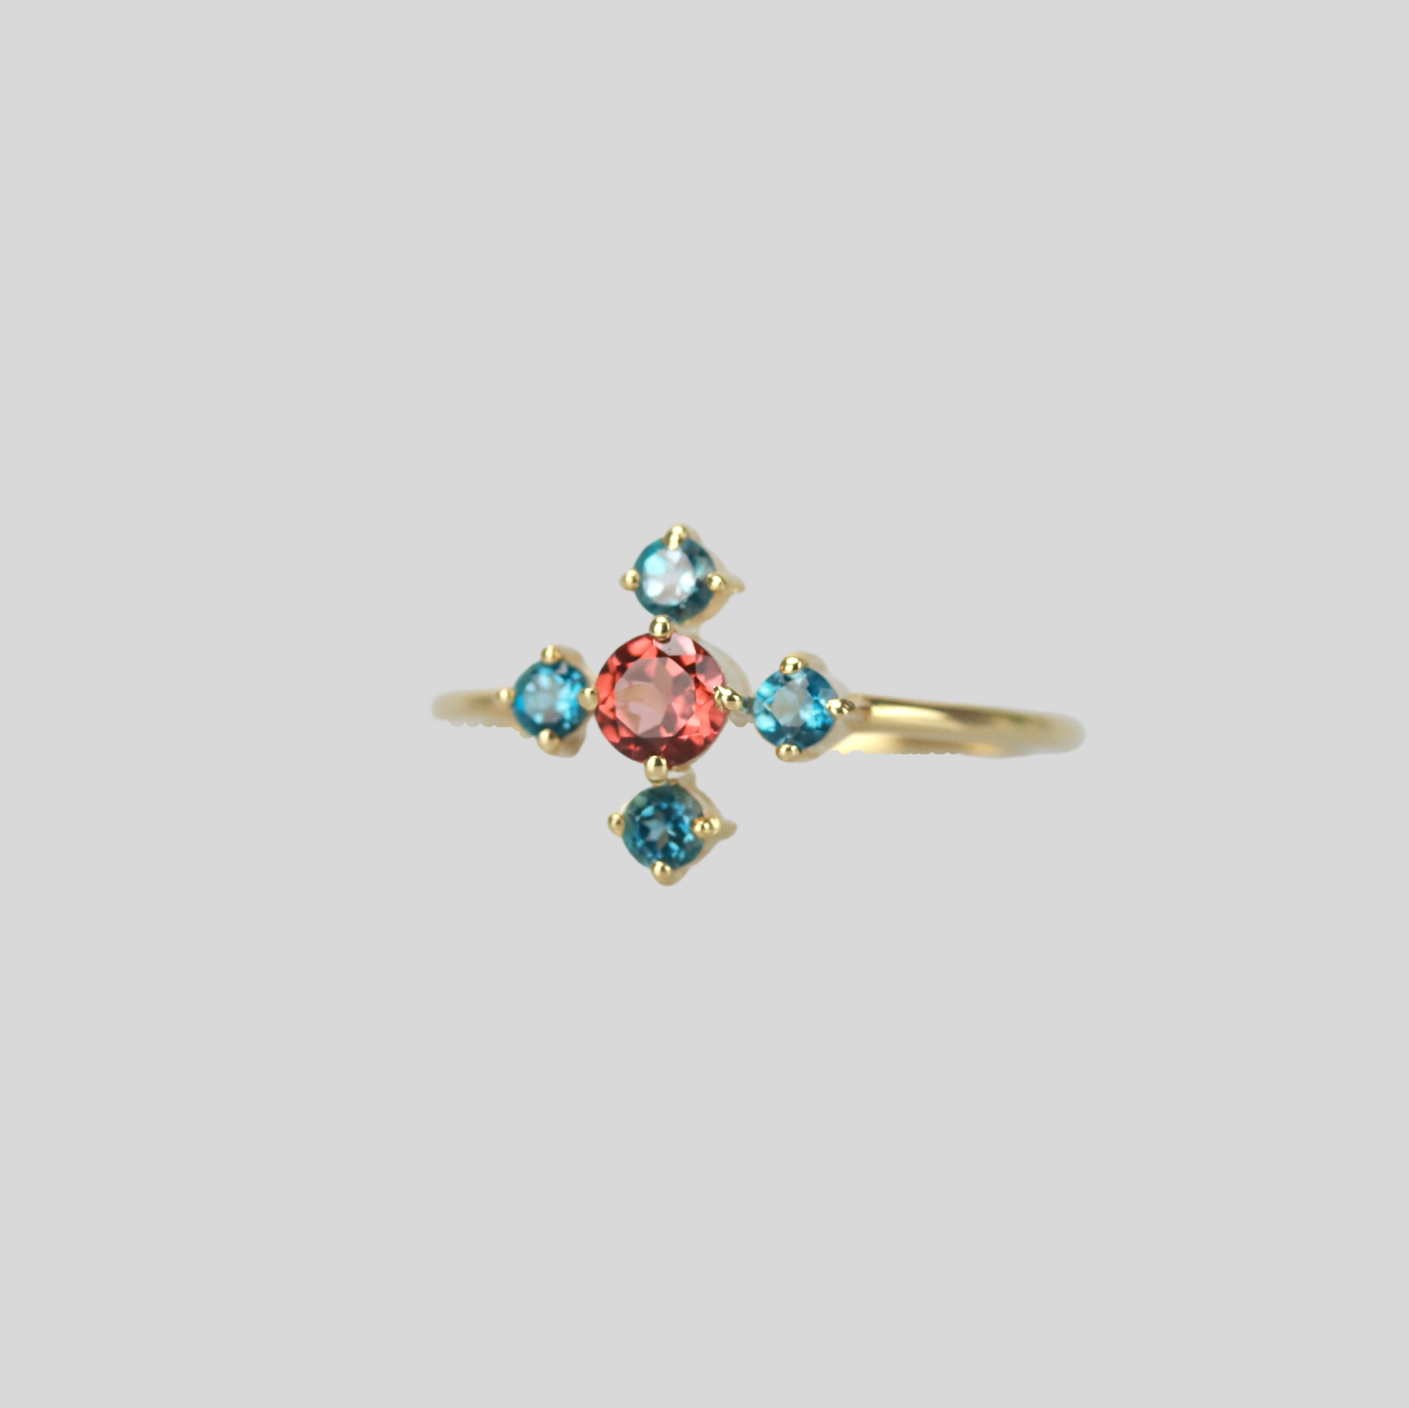 Solid 14k gold twinkling flower ring with garnet and london topaz